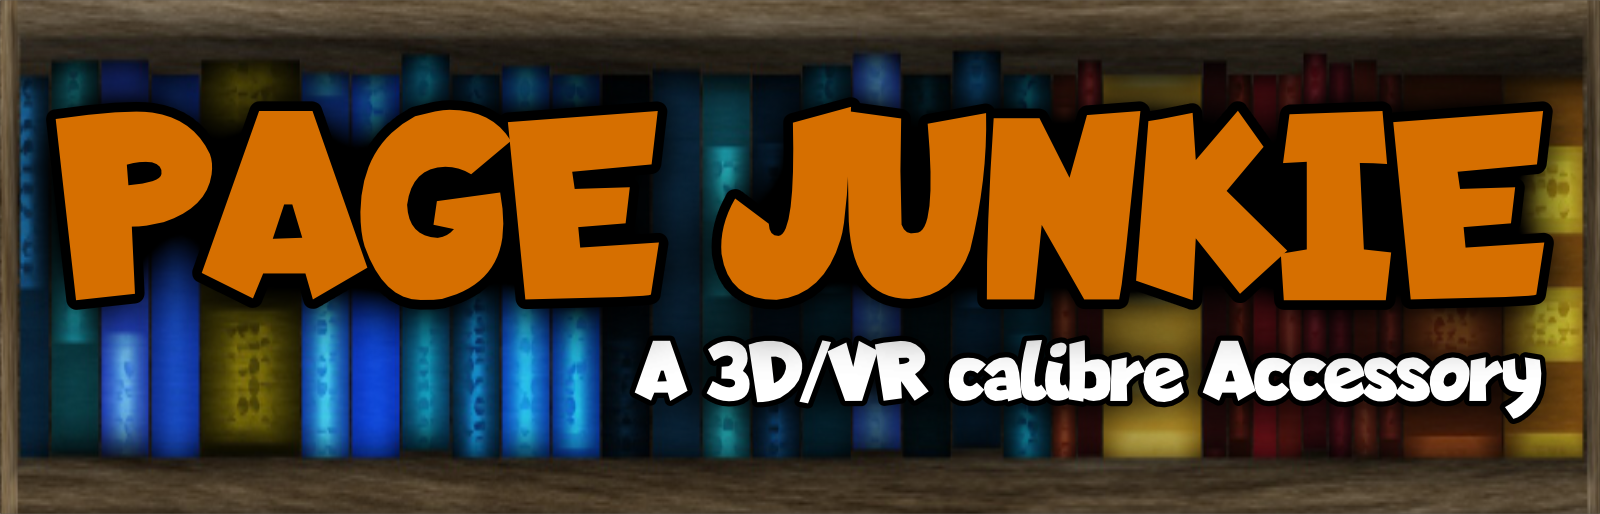 Page Junkie: A calibre accessory for PC Oculus/Meta VR (Virtual Reality)